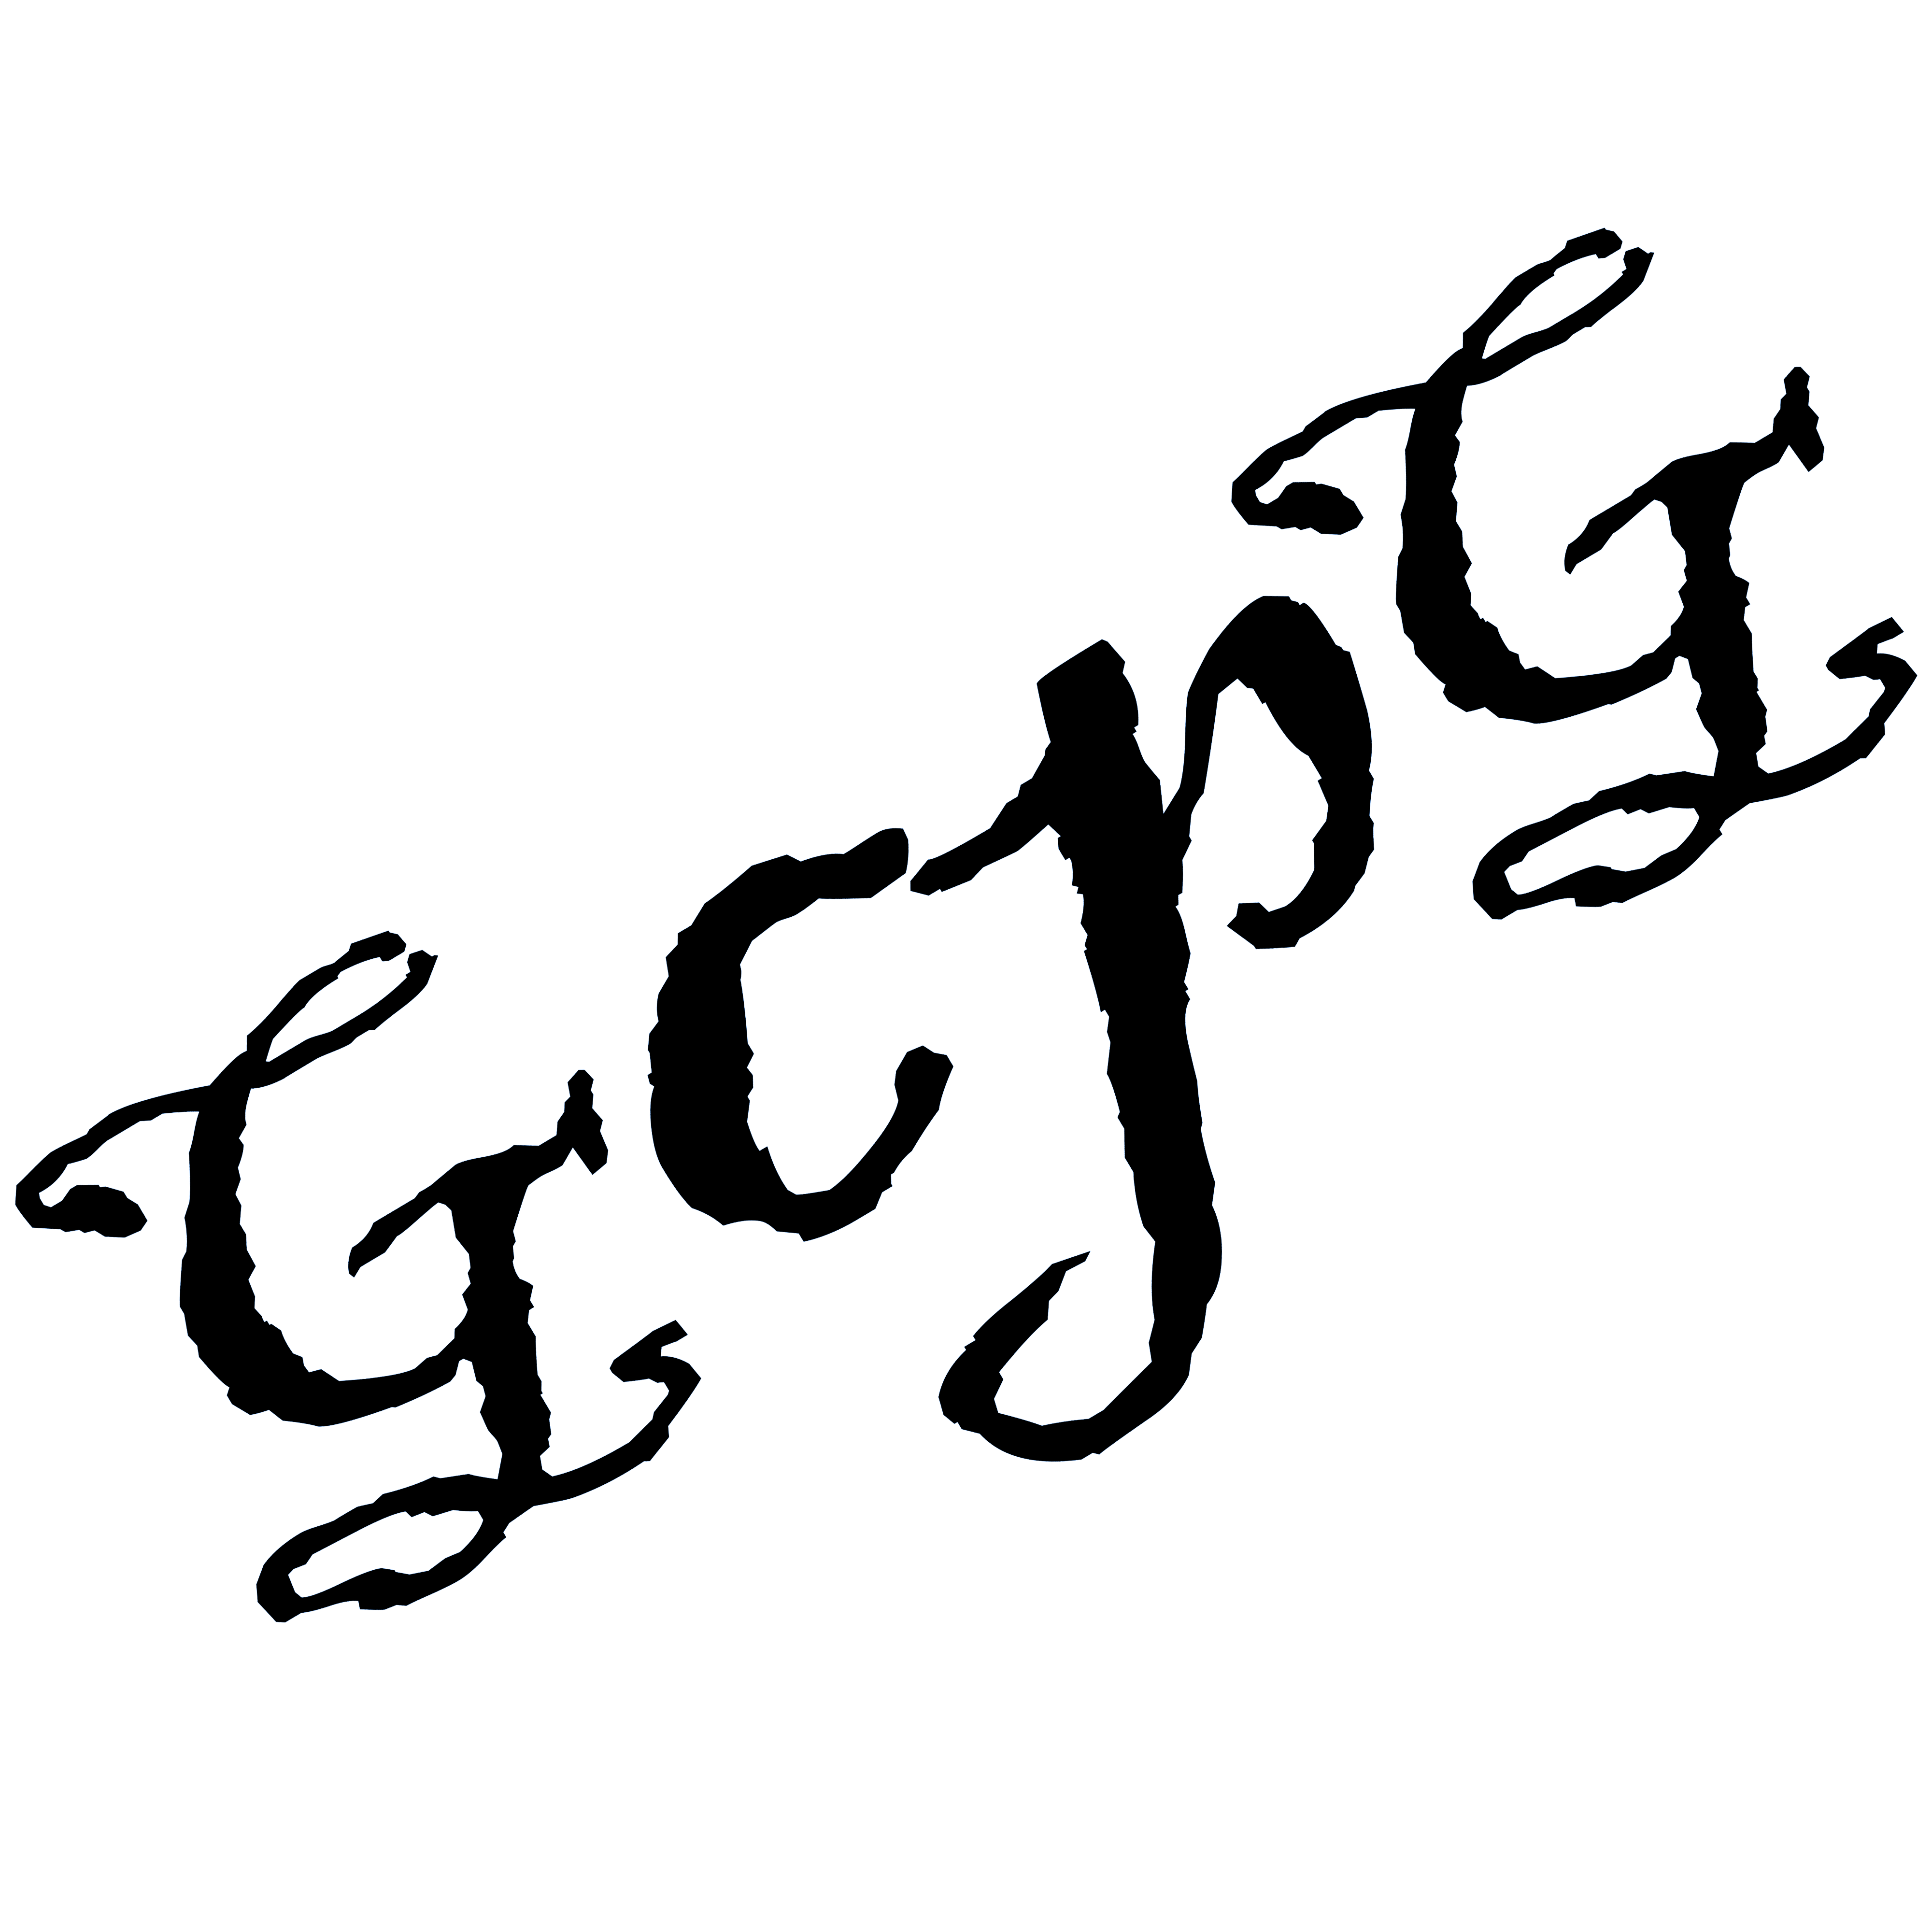 Image of Grace can't Play Guitar logo which is the band name abbreviated to G C P G